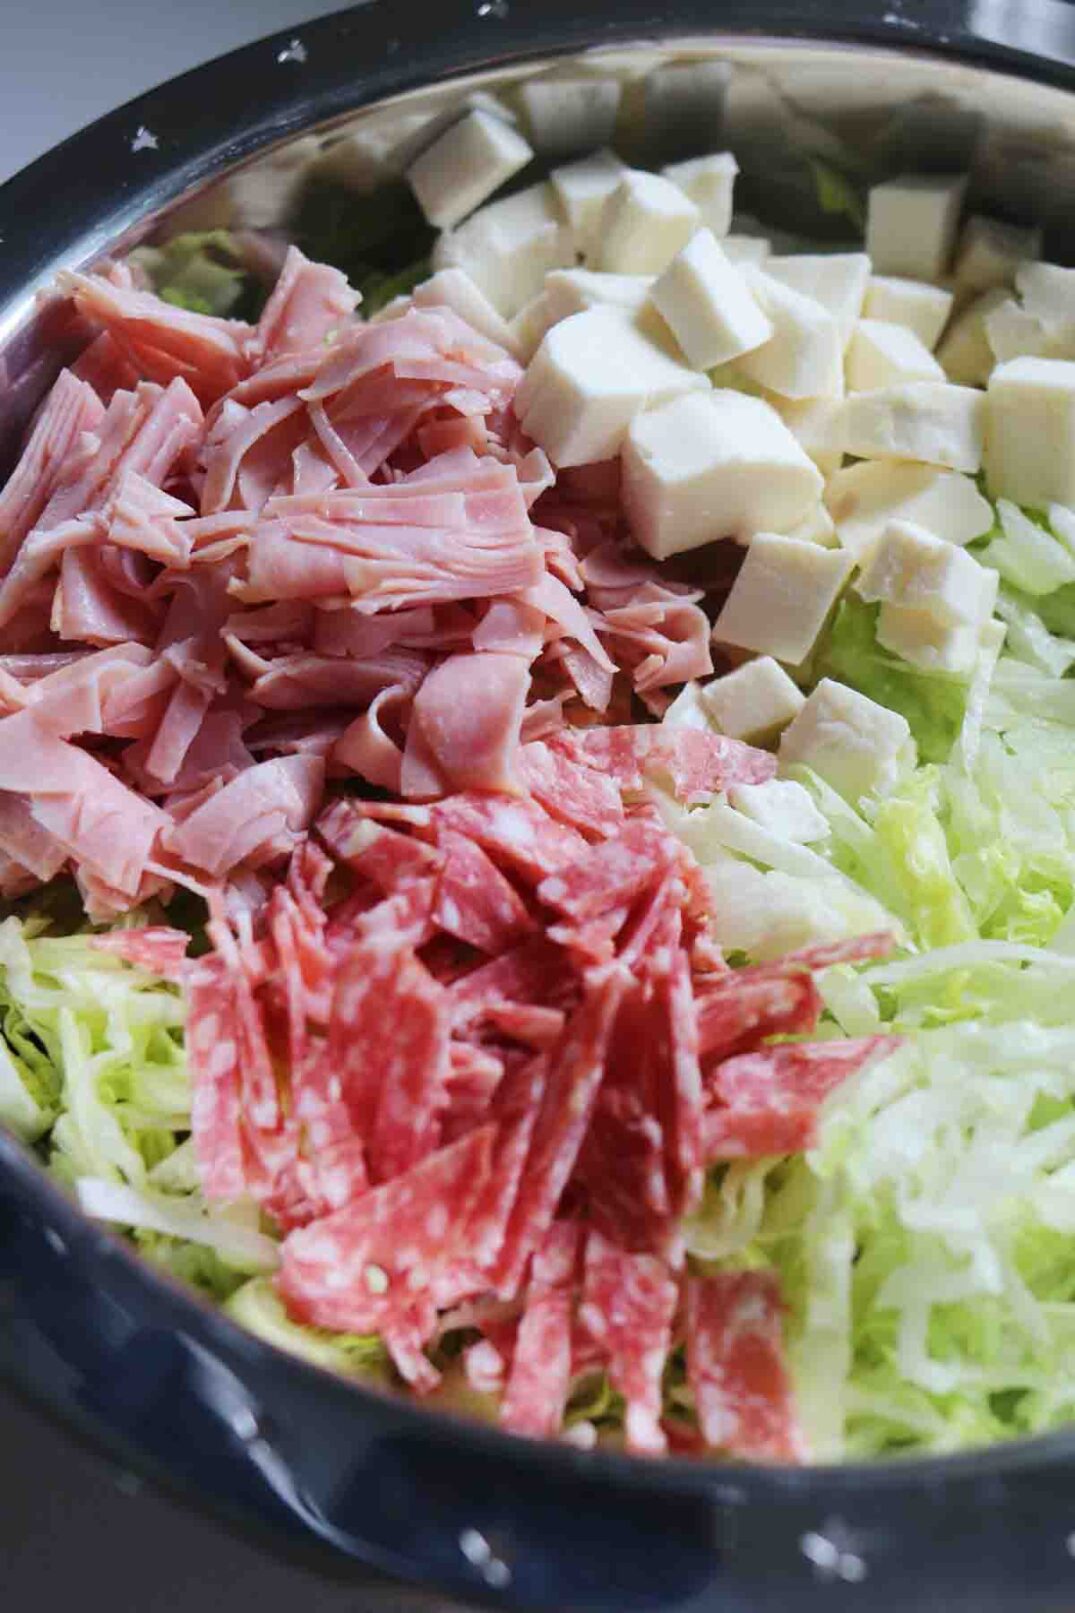 chopped up italian cold cuts in a silver bowl with shredded lettuce.